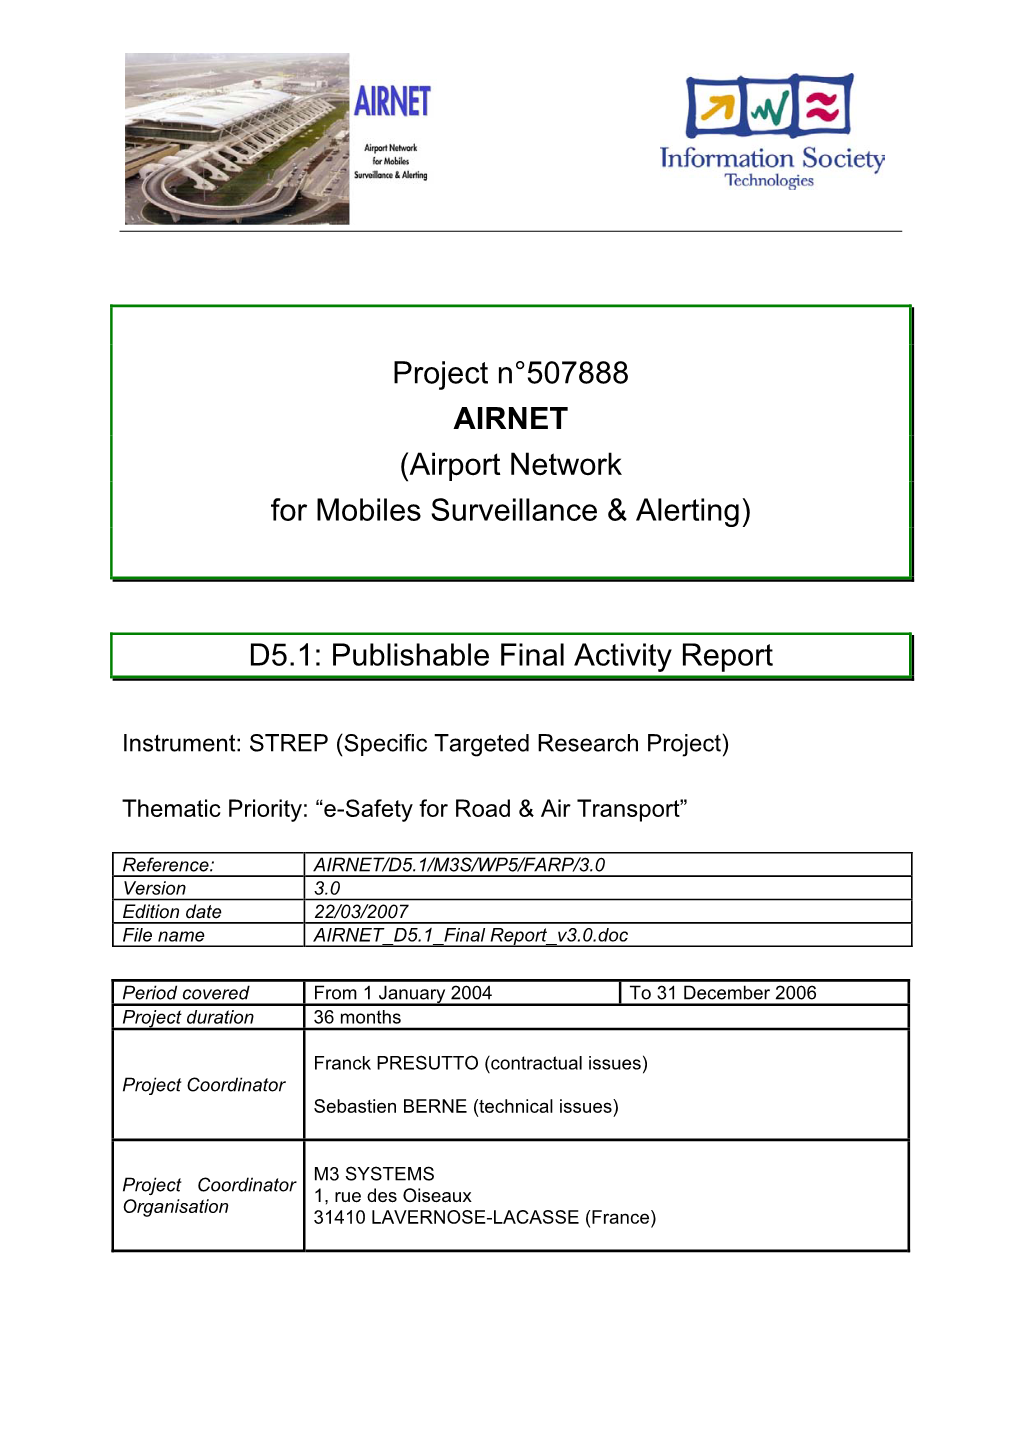 Project N°507888 AIRNET (Airport Network for Mobiles Surveillance & Alerting)